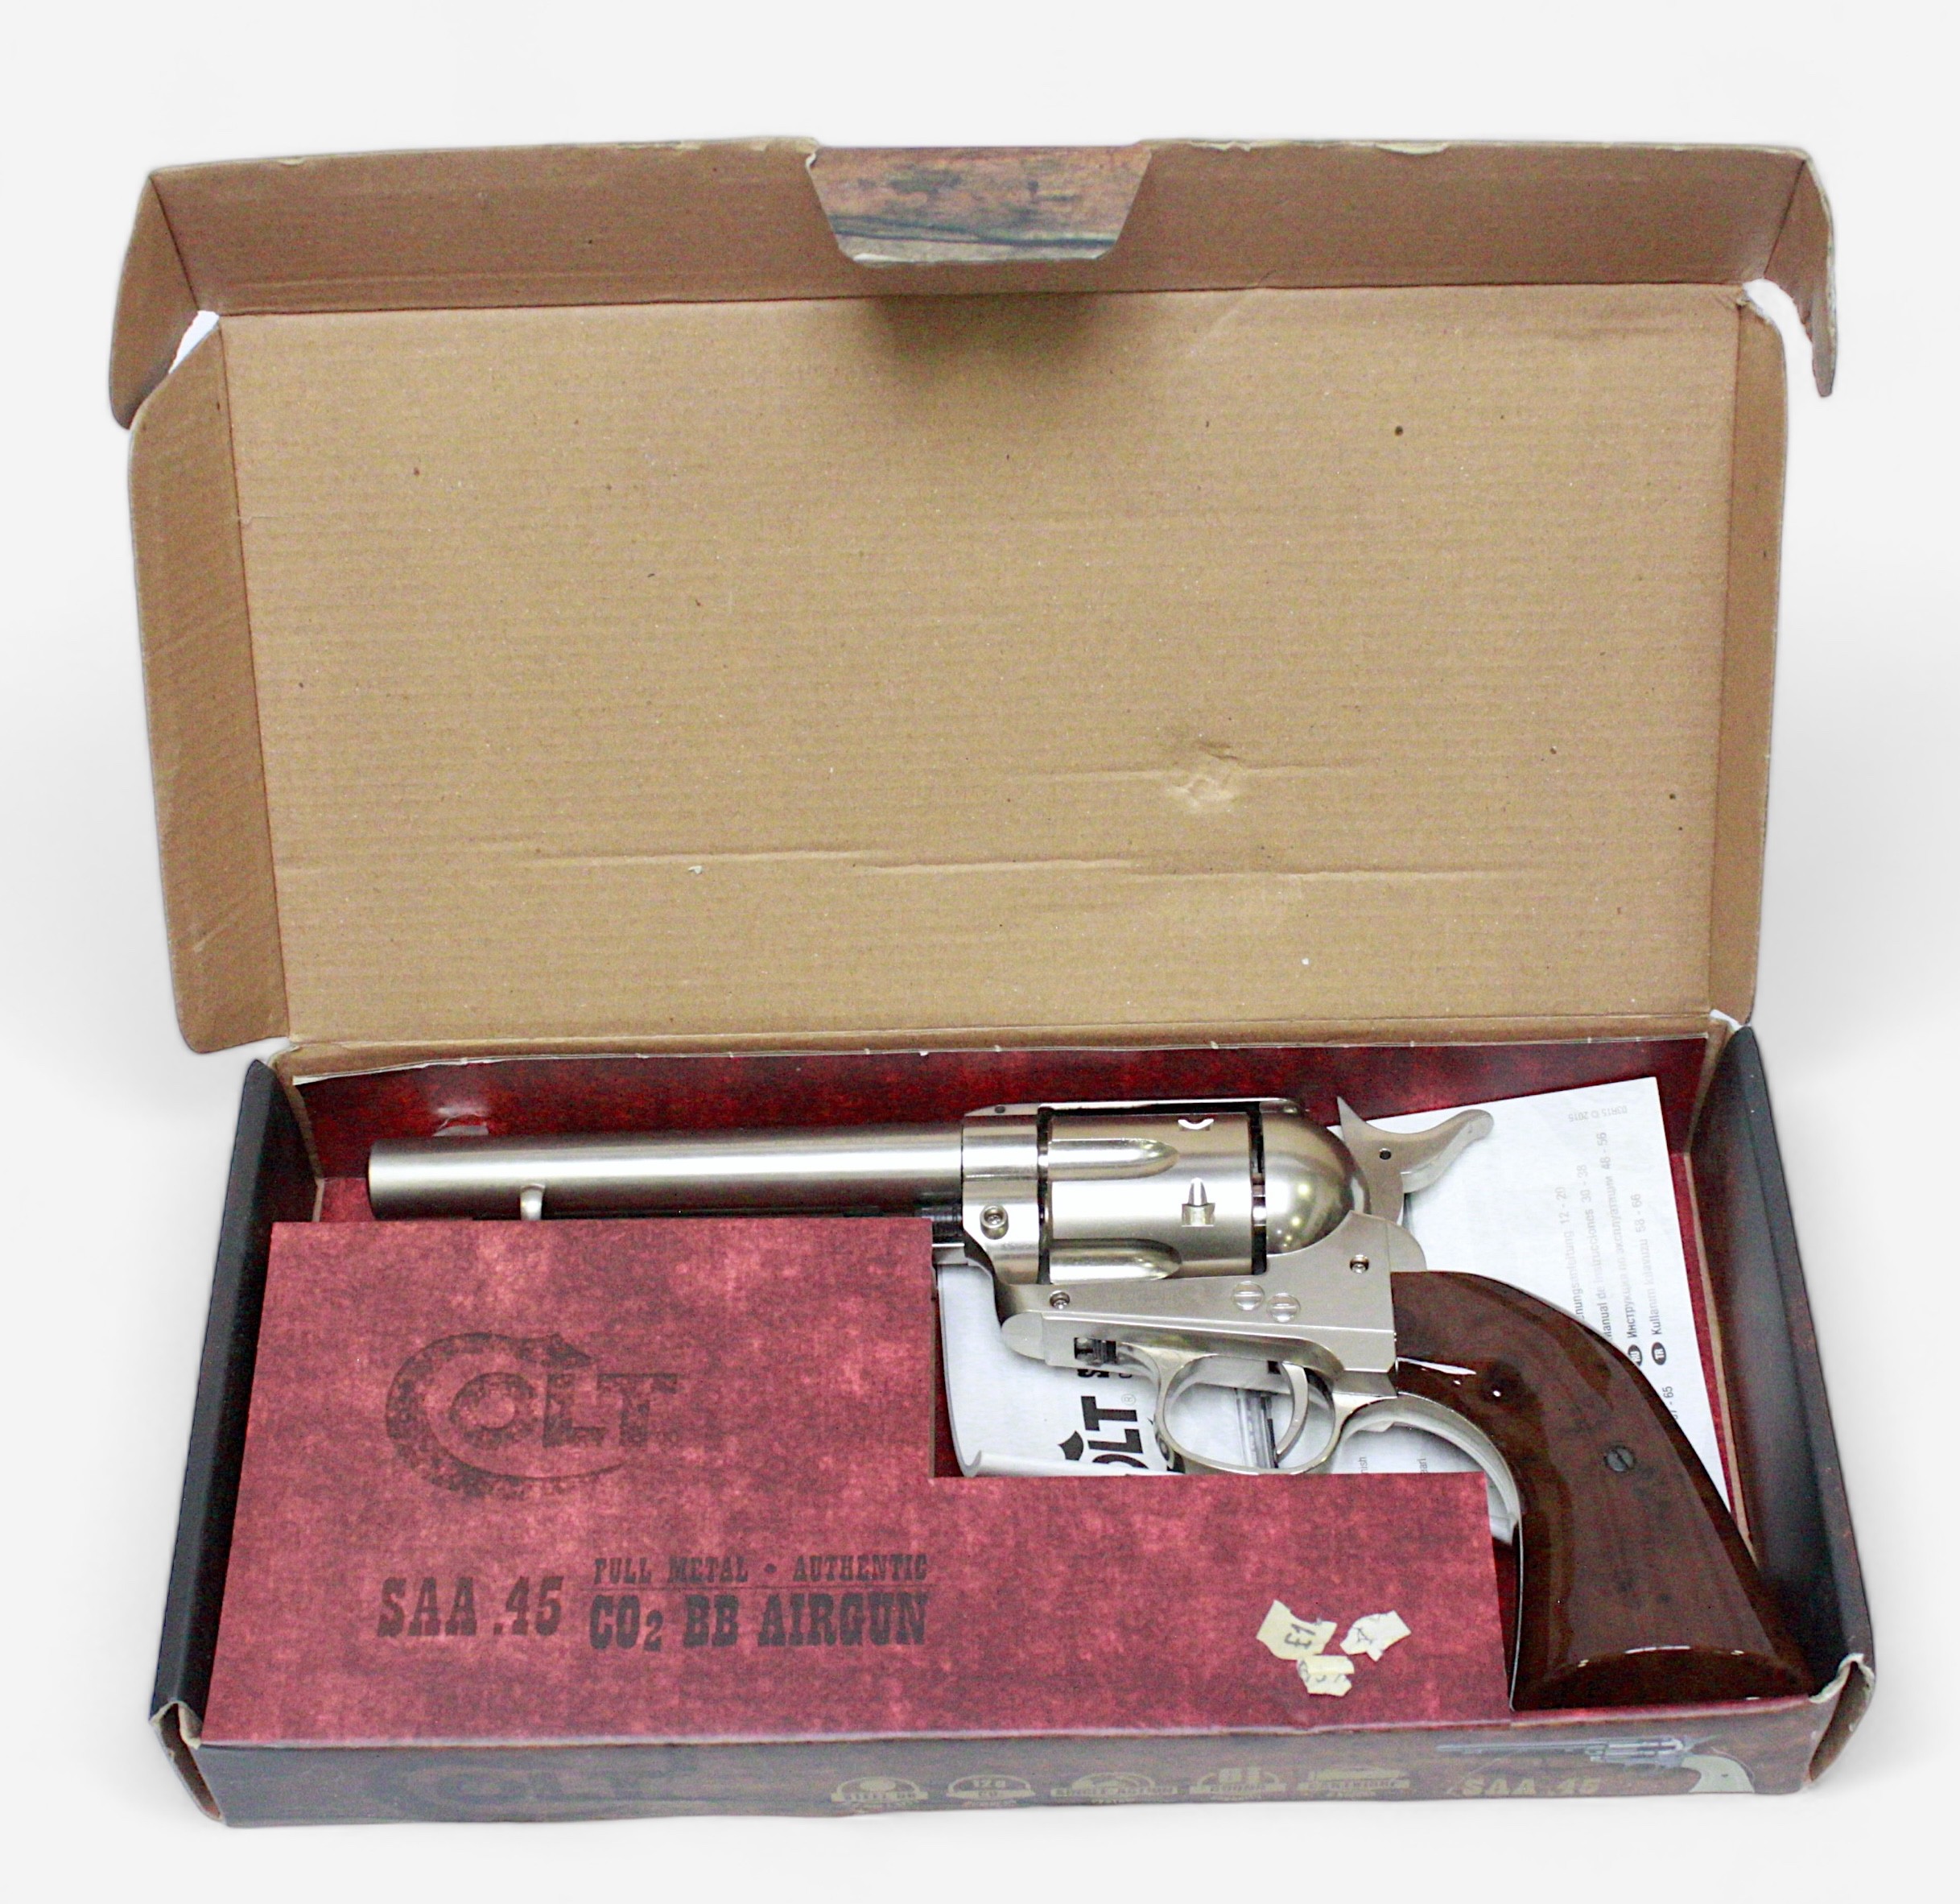 A Colt SAA. 45 CO2 Revolver, with nickel finish and wood effect grip. Calibre .177 pellet, in